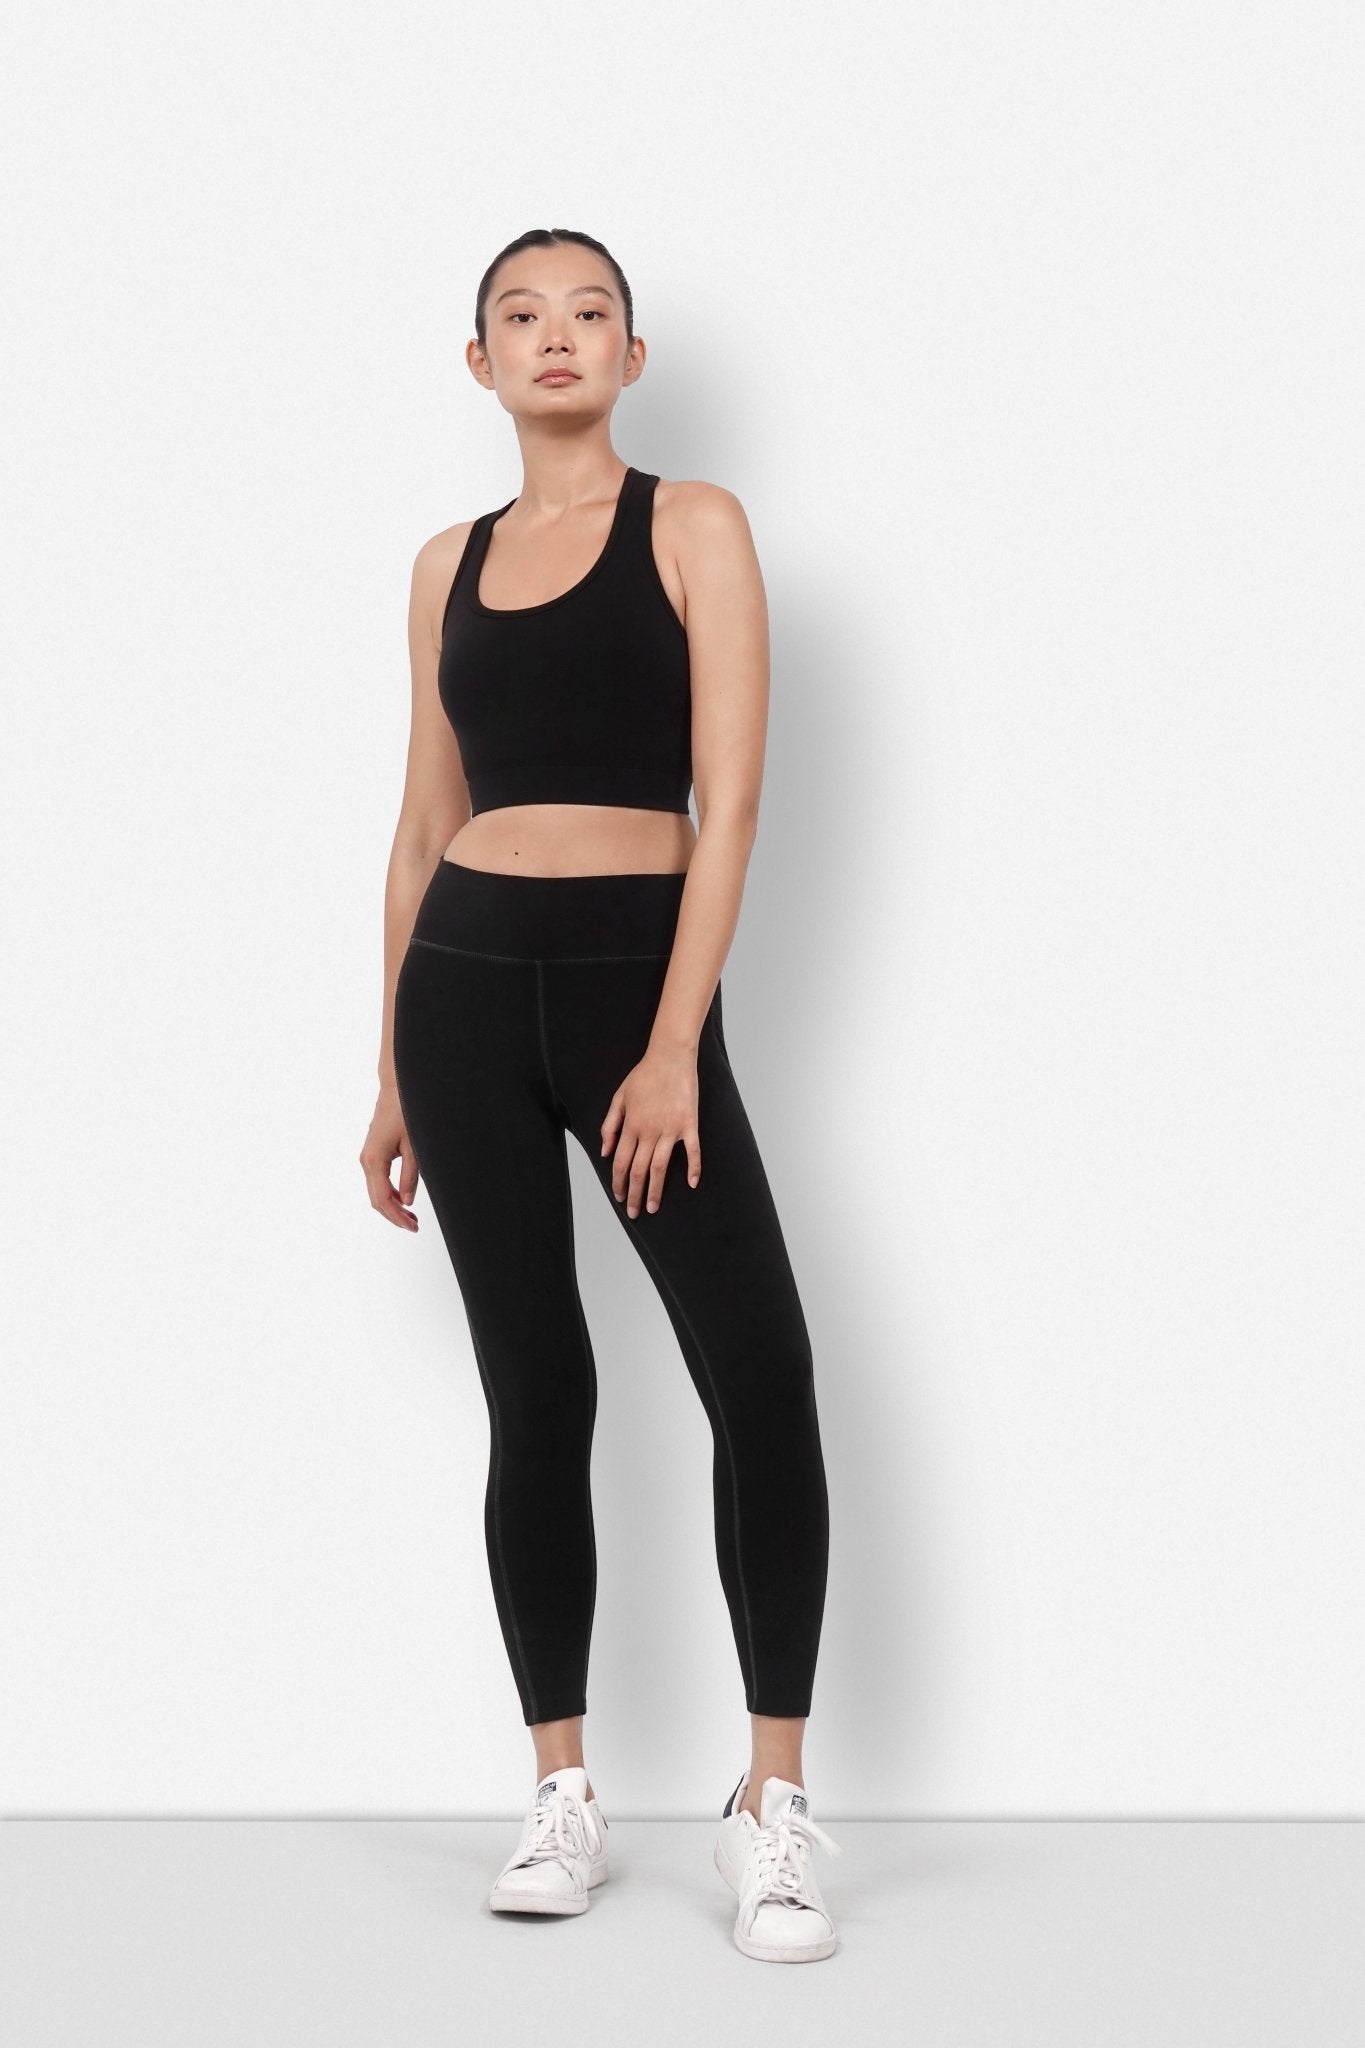 Stay Active and Stylish with VSX Sport Leggings